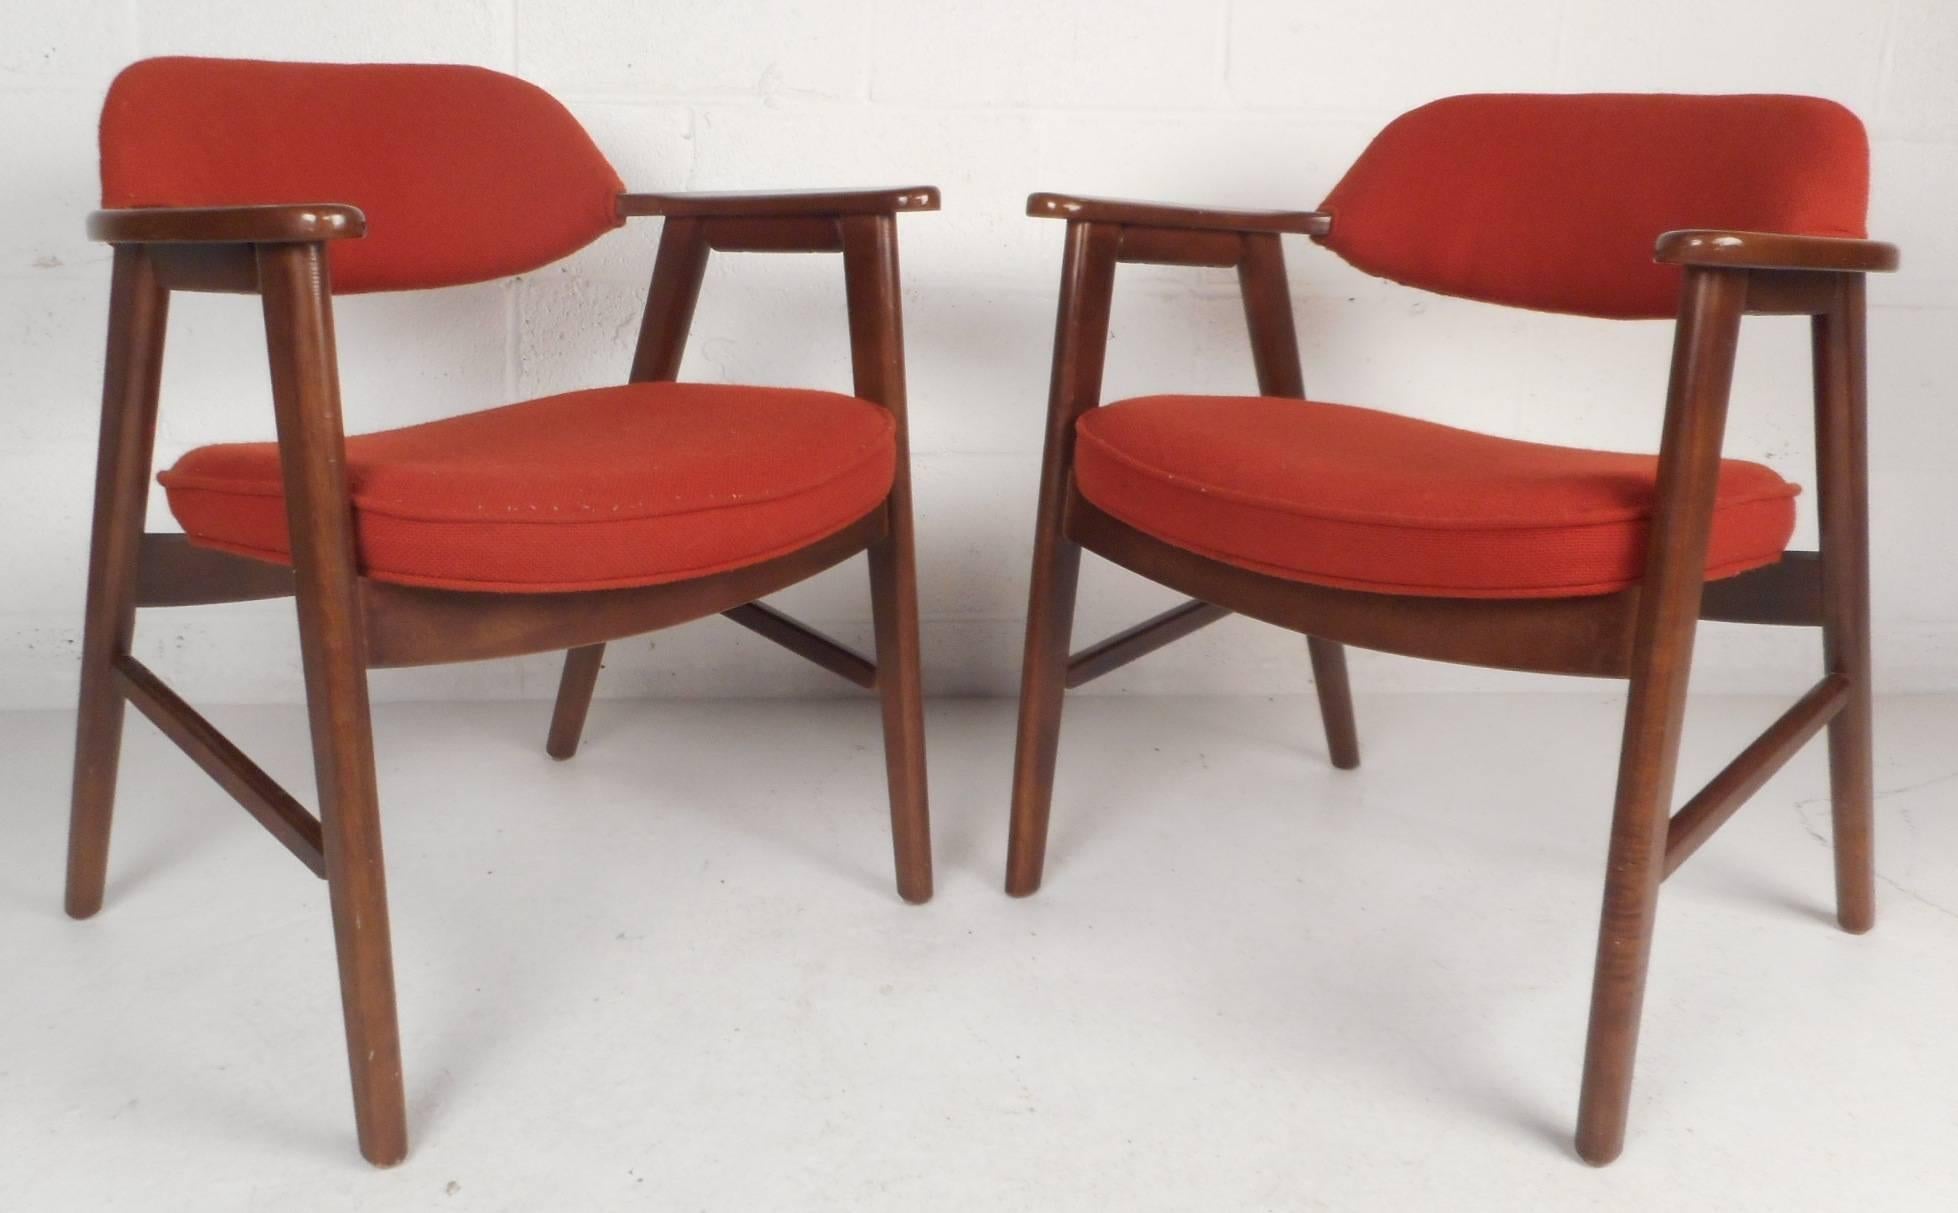 This beautiful pair of vintage modern side chairs feature a solid dark mahogany frame and plush red upholstery. Unique design has stylish cut-out arm rests and angled back legs. This sleek and sturdy Mid-Century Modern pair of arm chairs make the